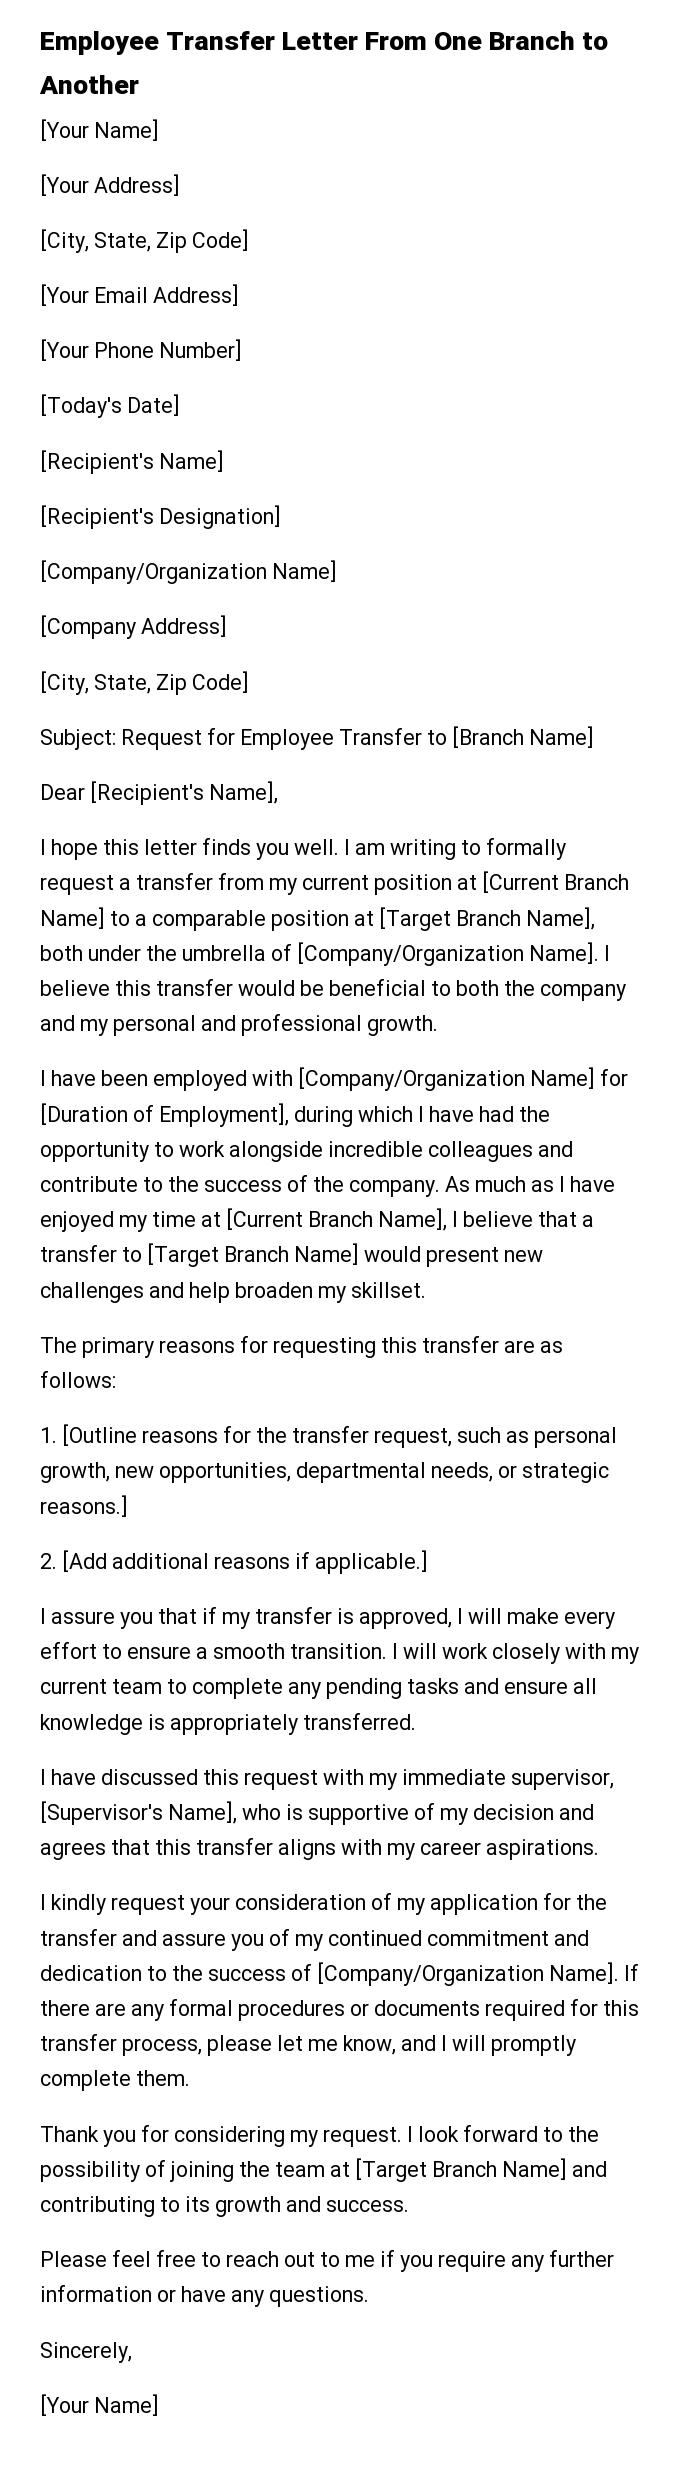 Employee Transfer Letter From One Branch to Another